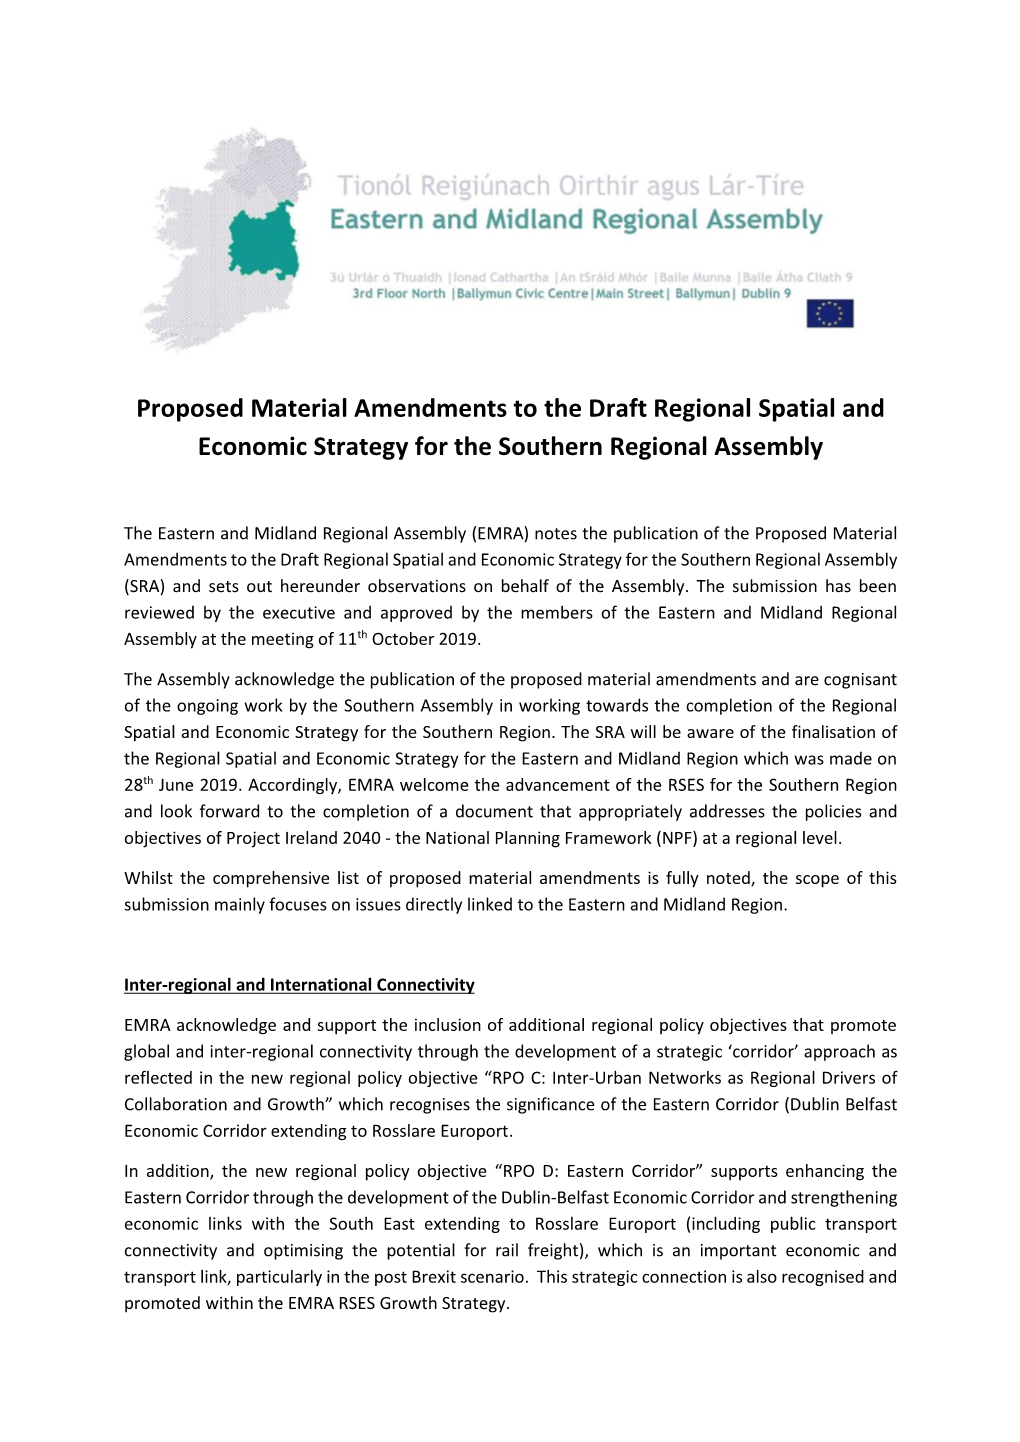 Proposed Material Amendments to the Draft Regional Spatial and Economic Strategy for the Southern Regional Assembly